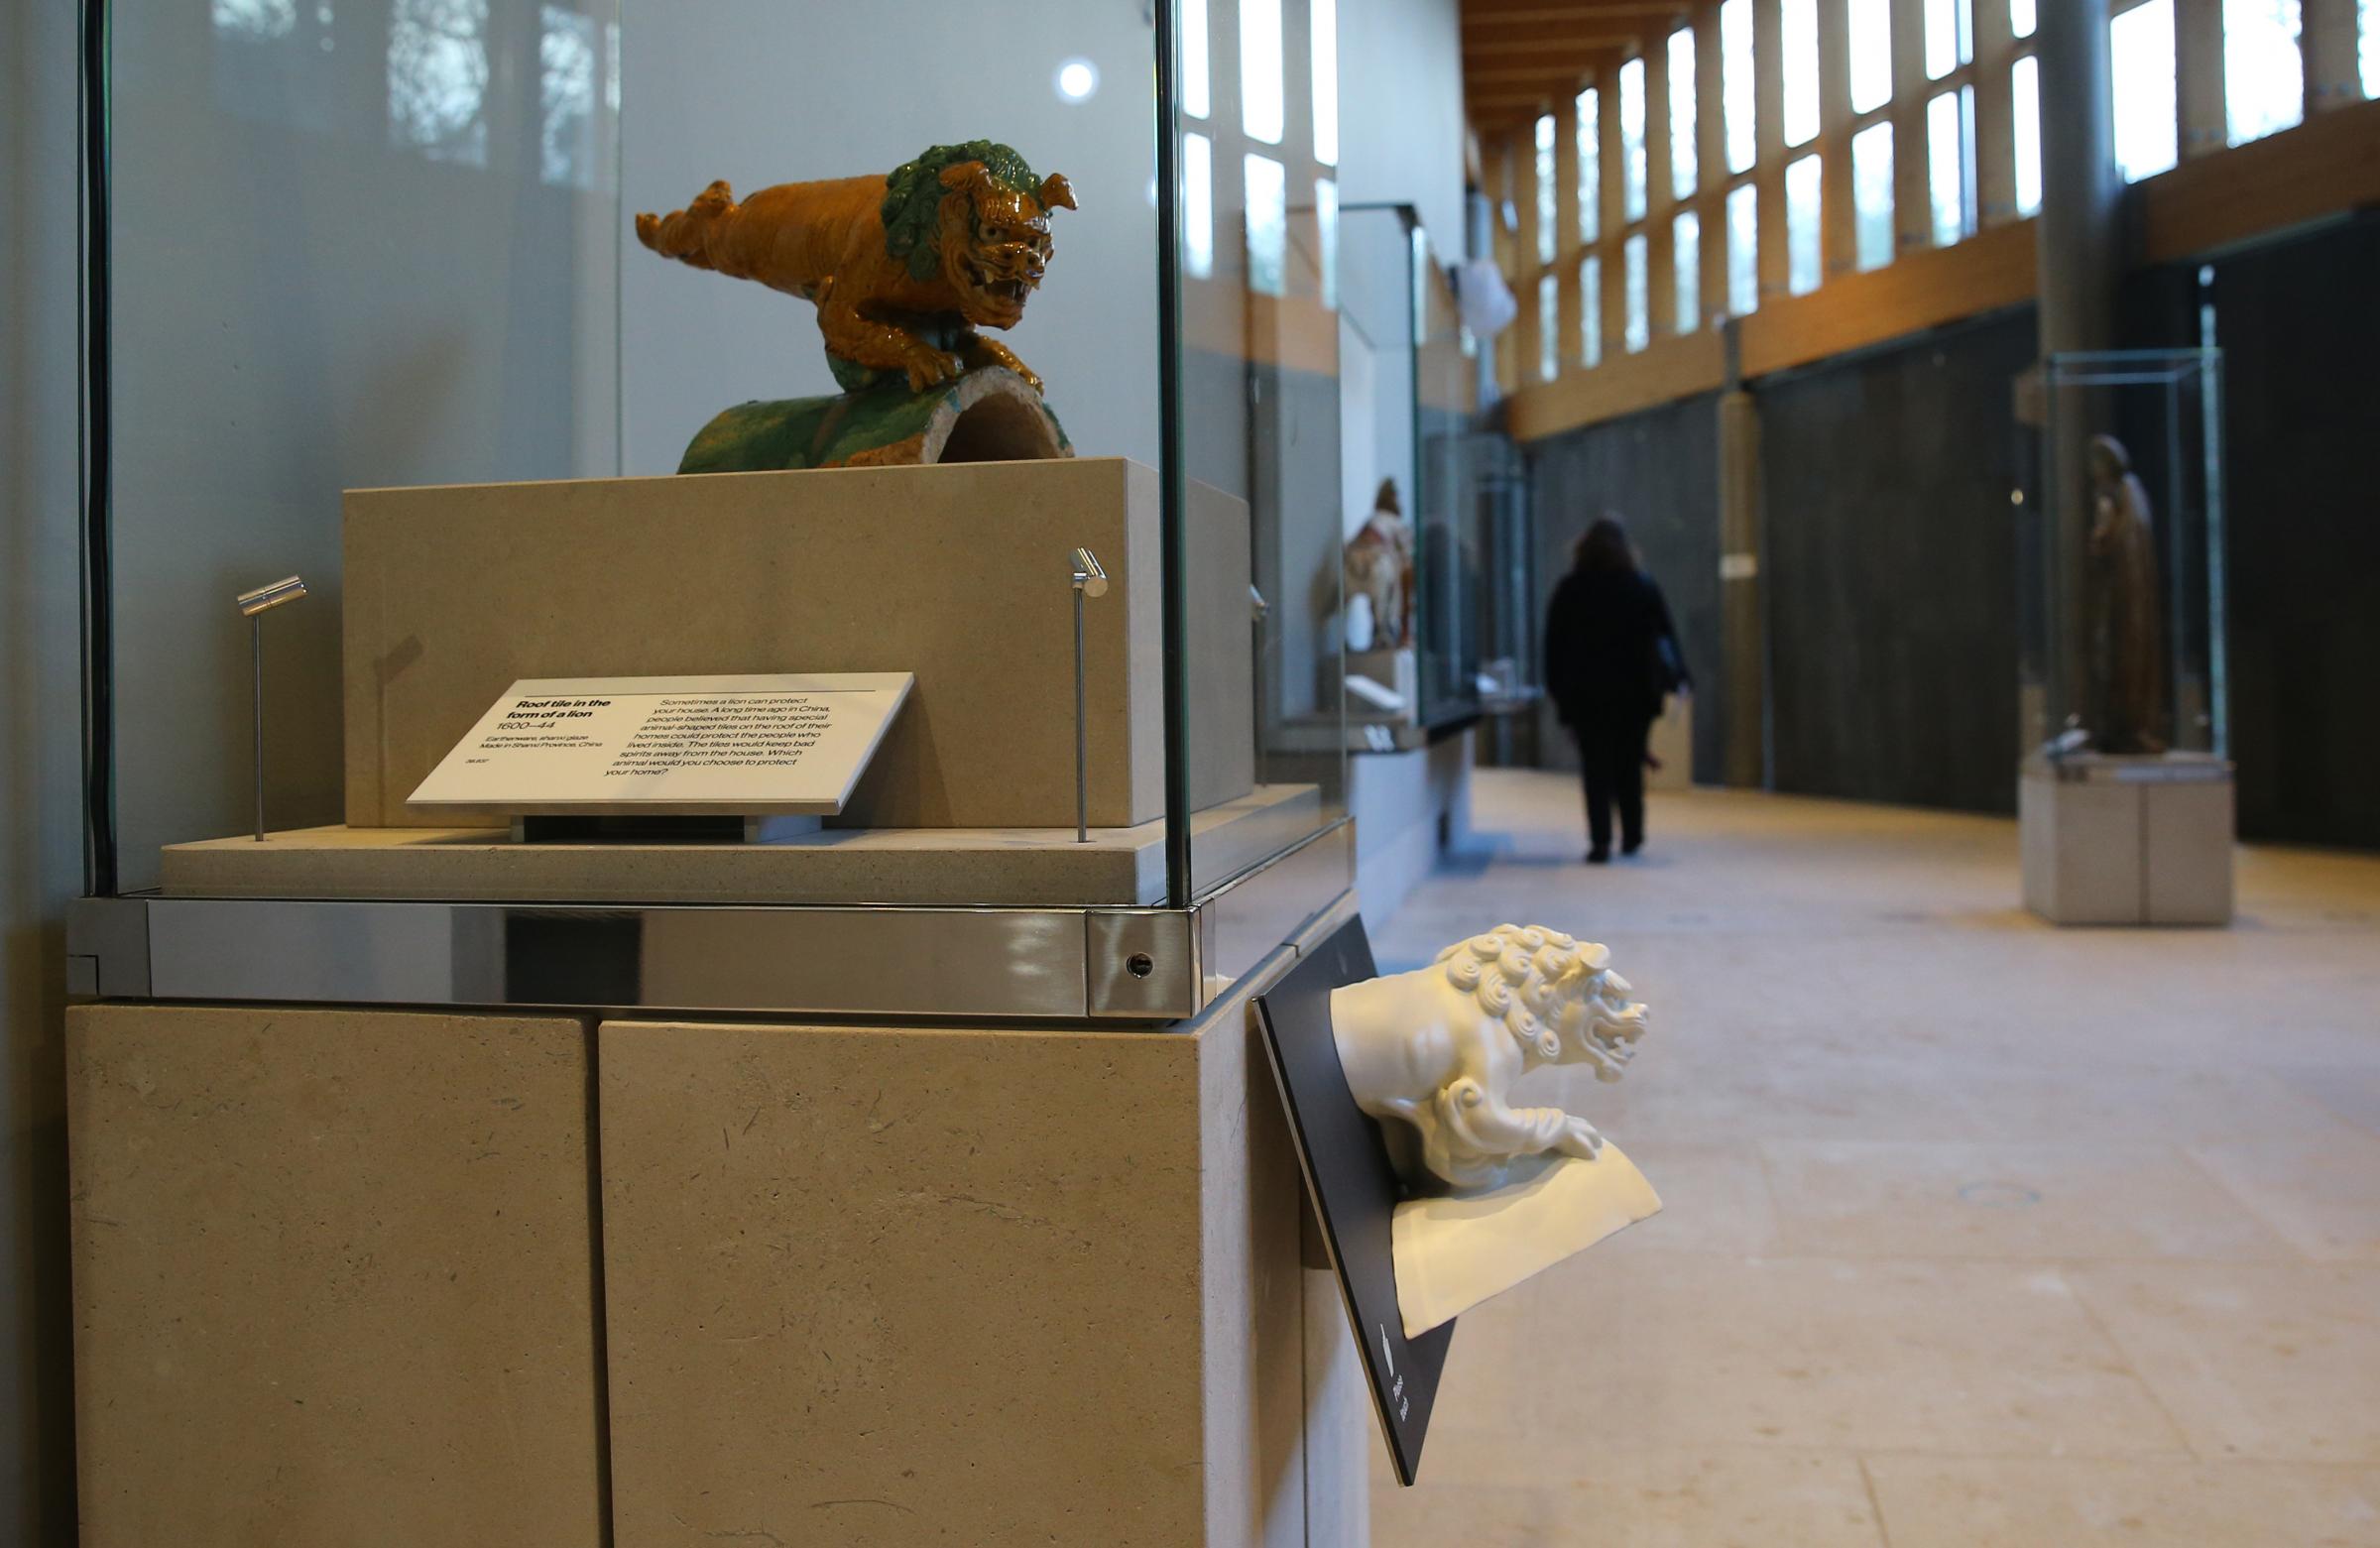 The Burrell Collection will reopen to the public next month after a £69m revamp